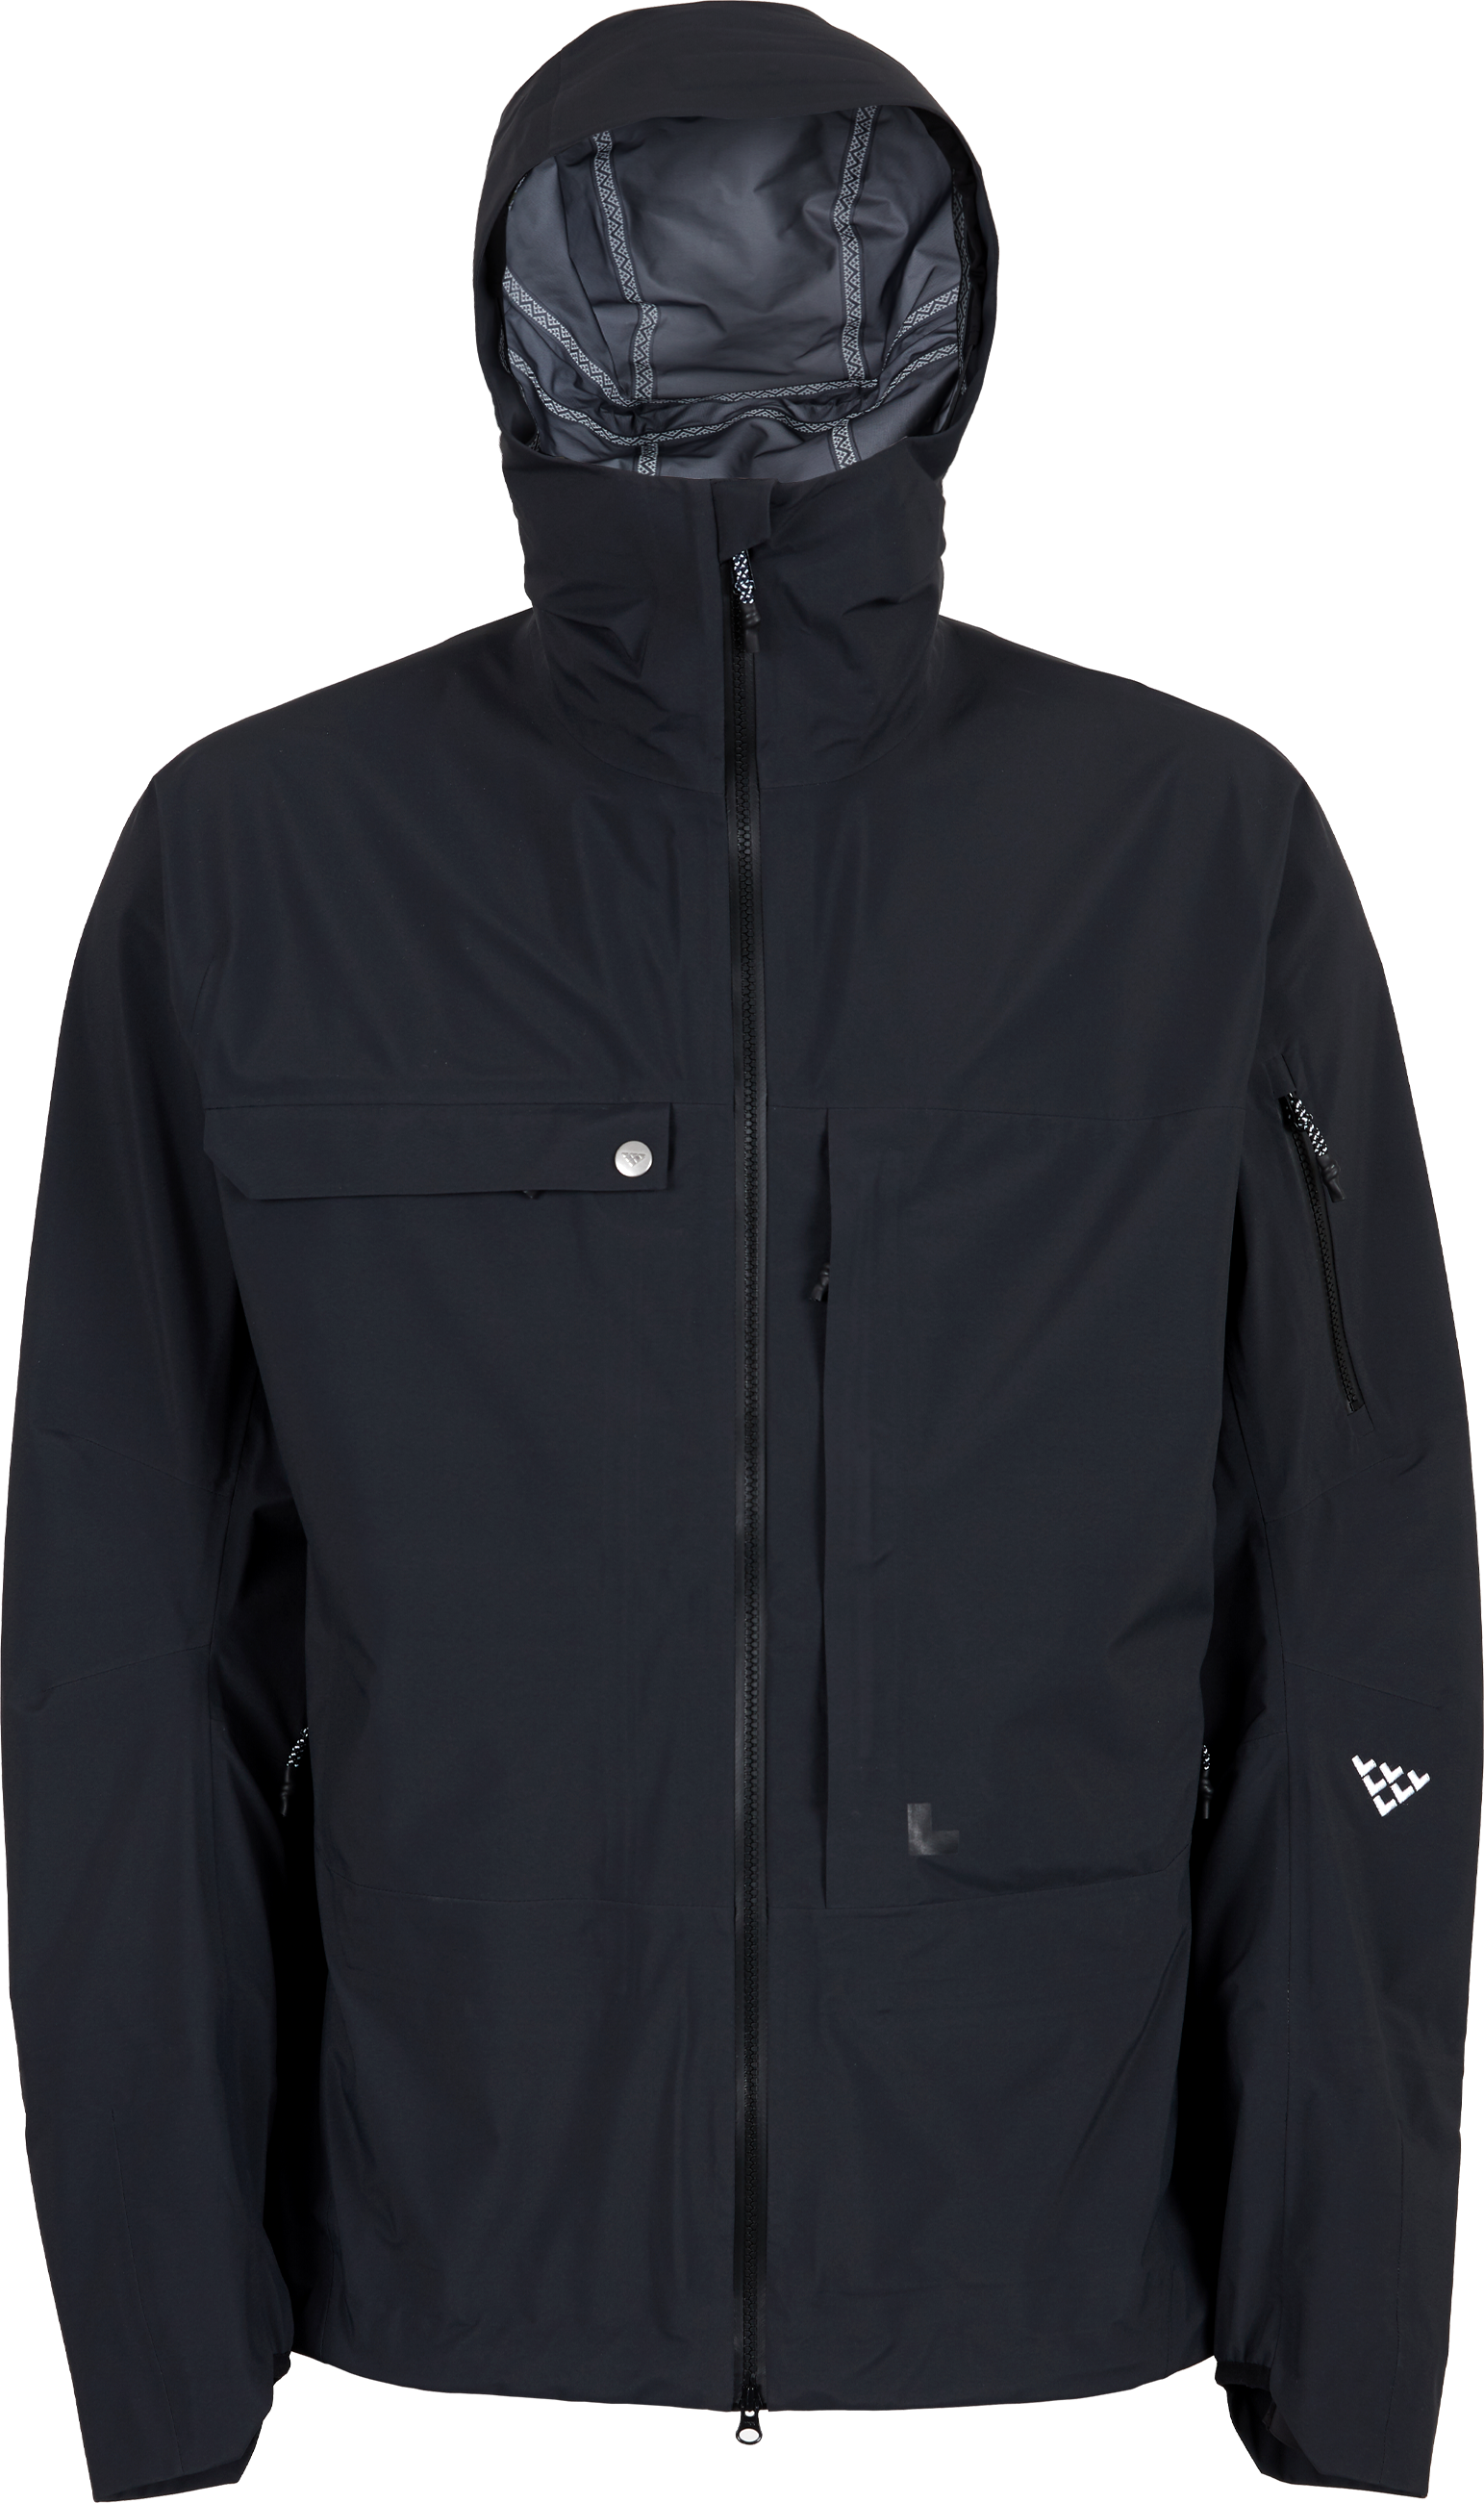 Black Crows Ventus 3l Gore Tex Light Jacket Men S Up To 48 Off W Free Shipping And Handling